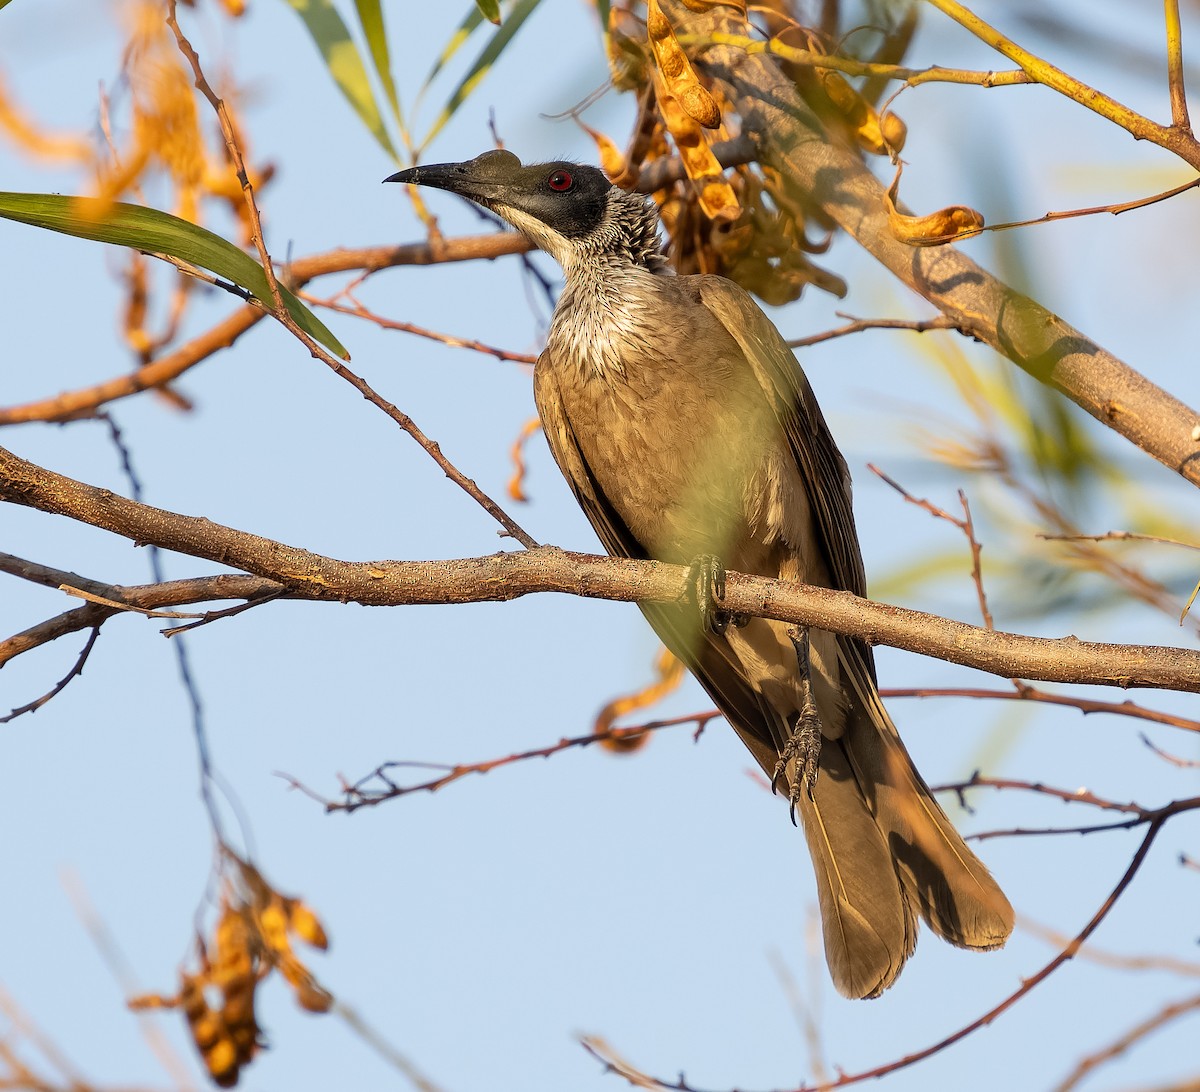 Silver-crowned Friarbird - Simon Colenutt